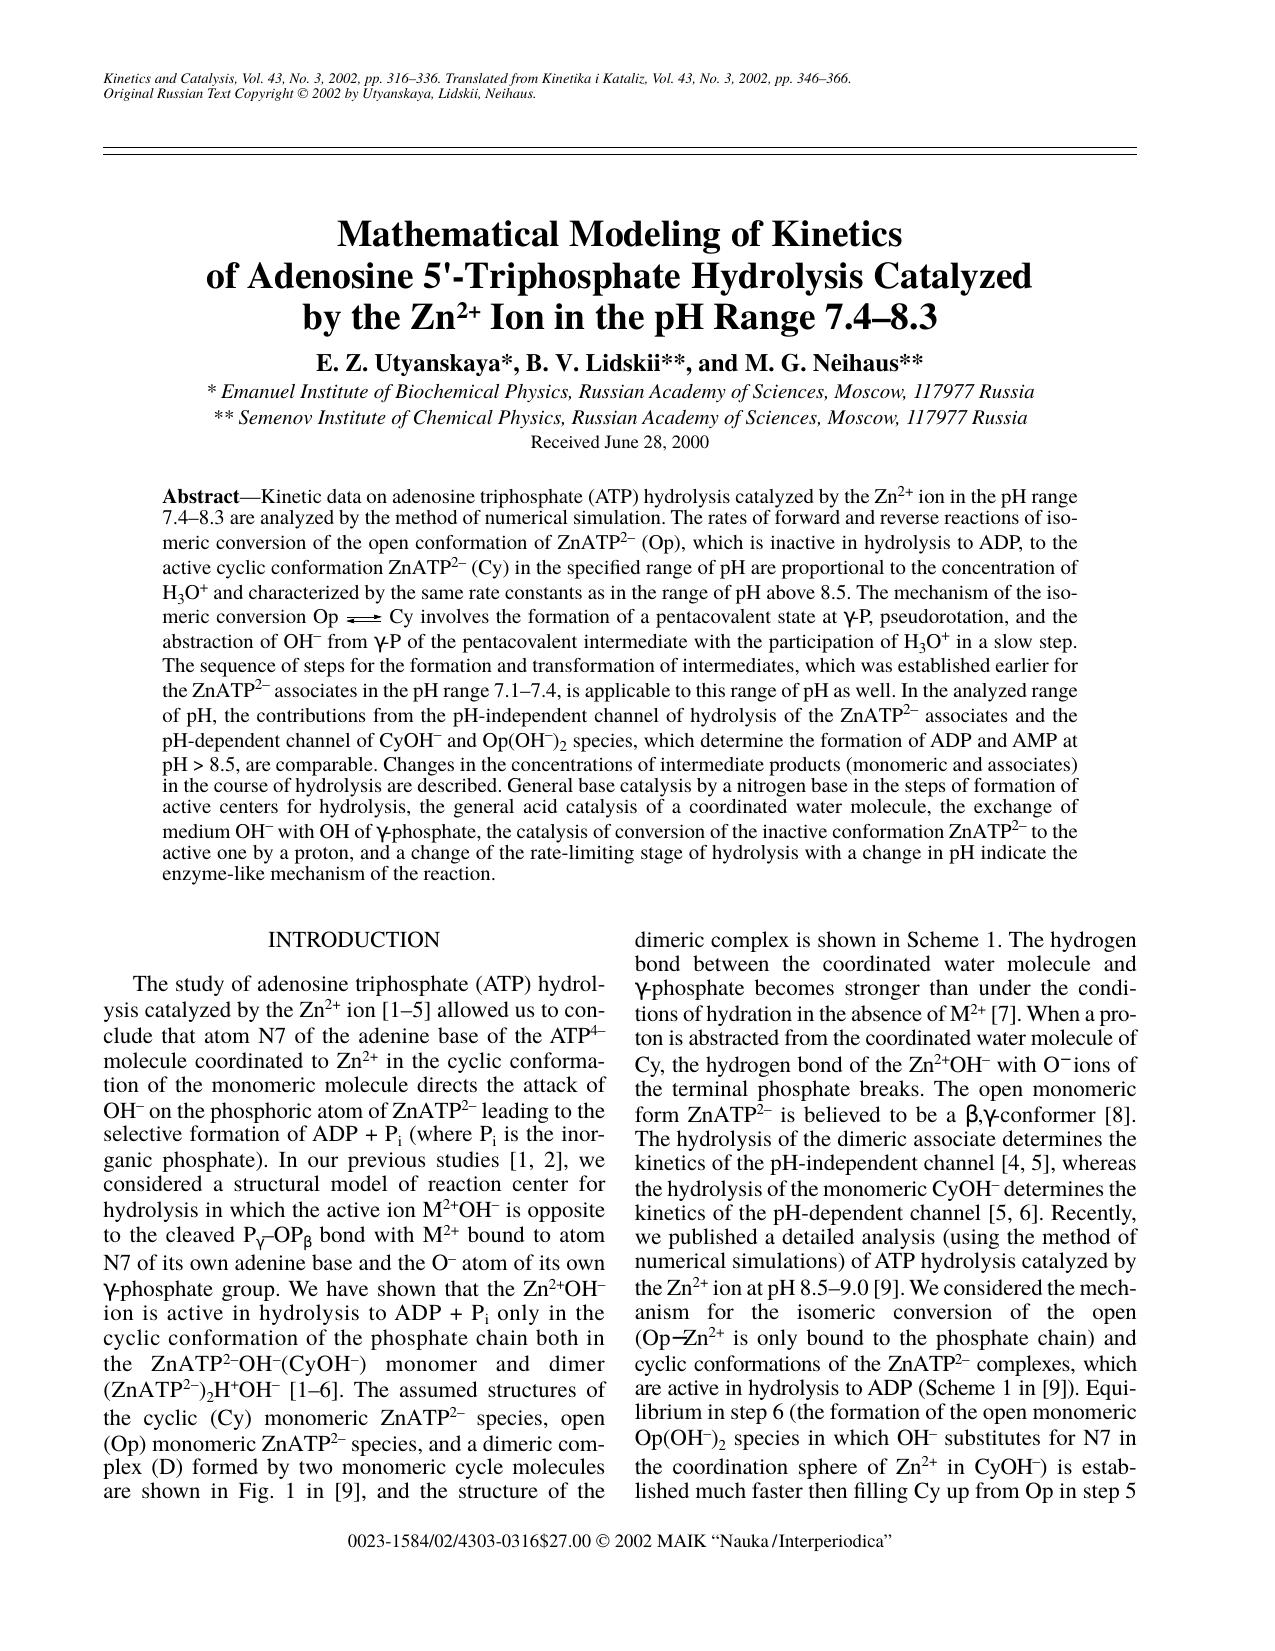 Mathematical Modeling of Kinetics of Adenosine 5&#x0022;-Triphosphate Hydrolysis Catalyzed by the Zn2+ Ion in the pH Range 7.4&#x2013;8.3 by Unknown